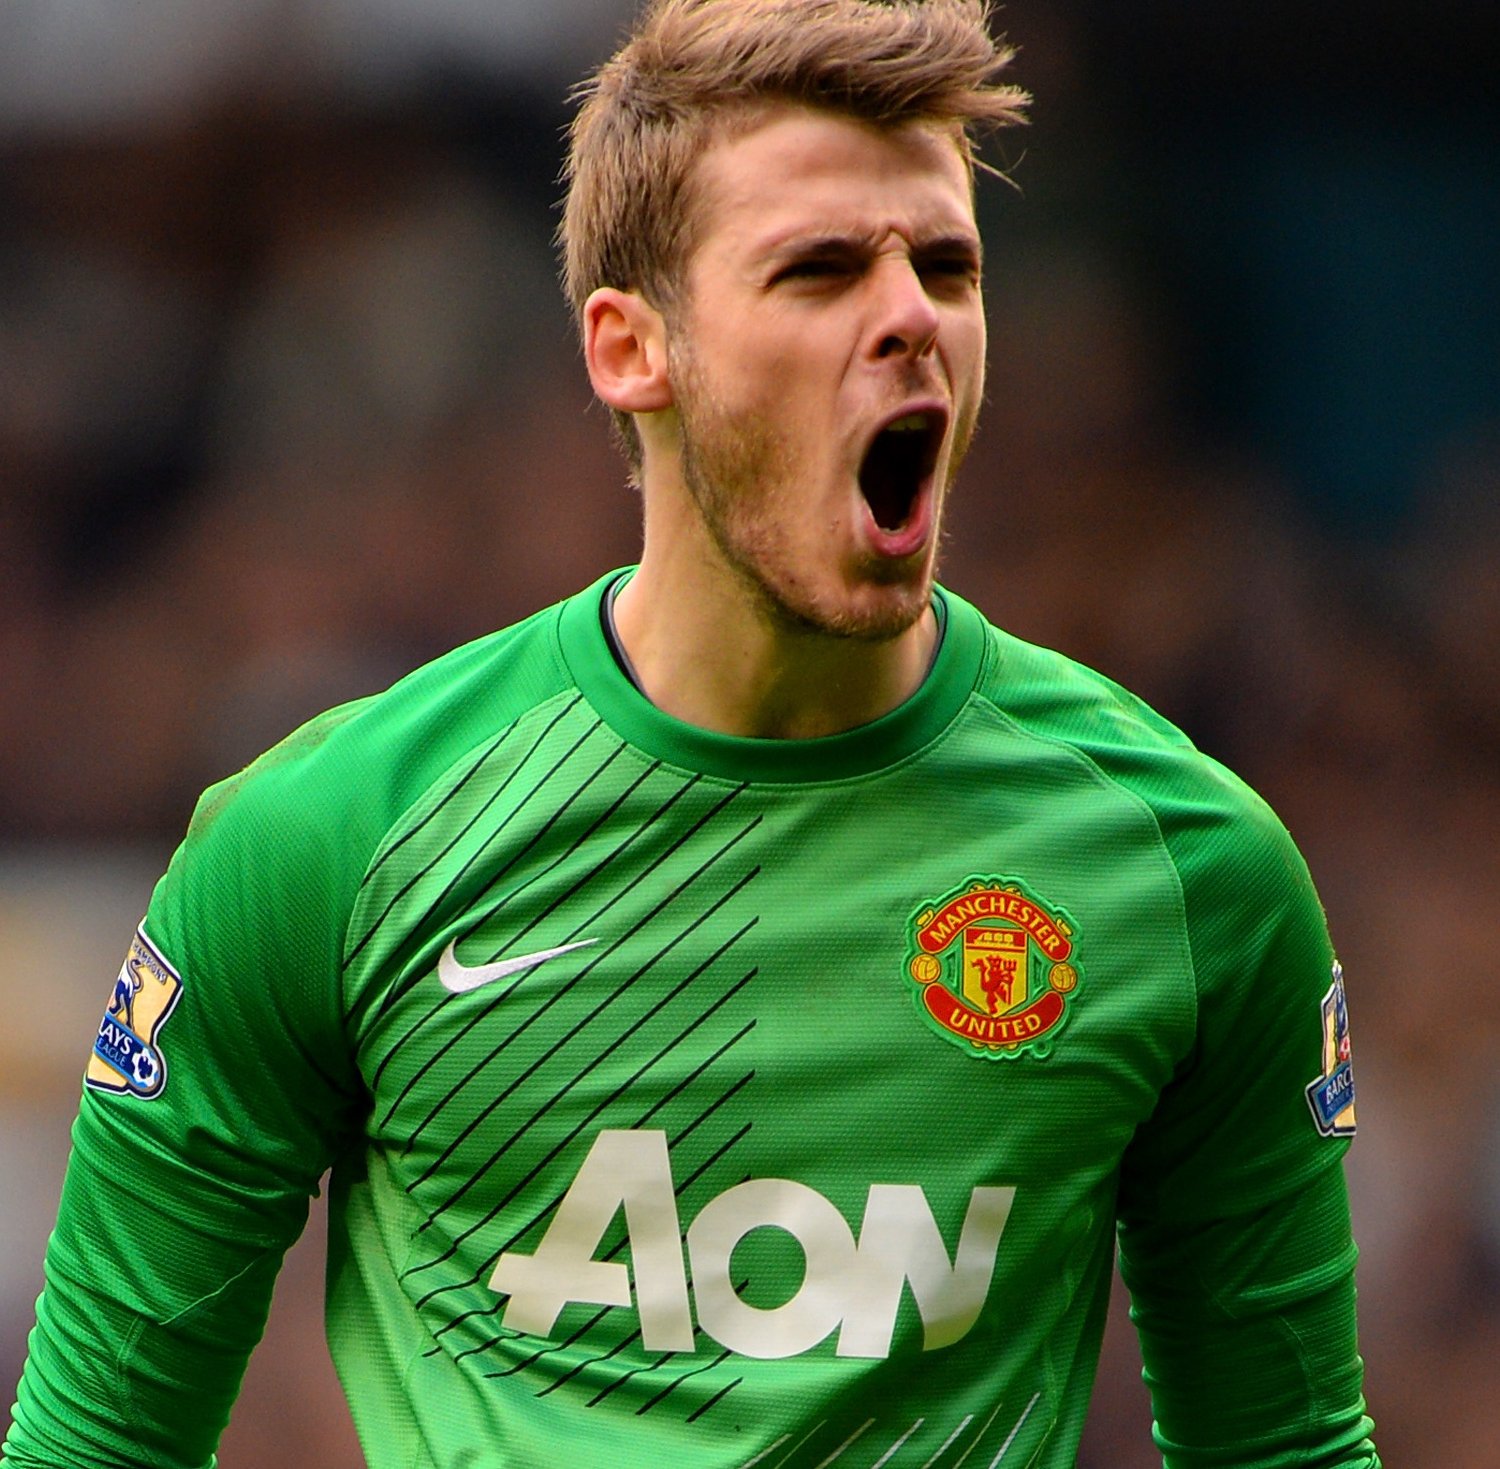 De Gea will be the most expensive in history